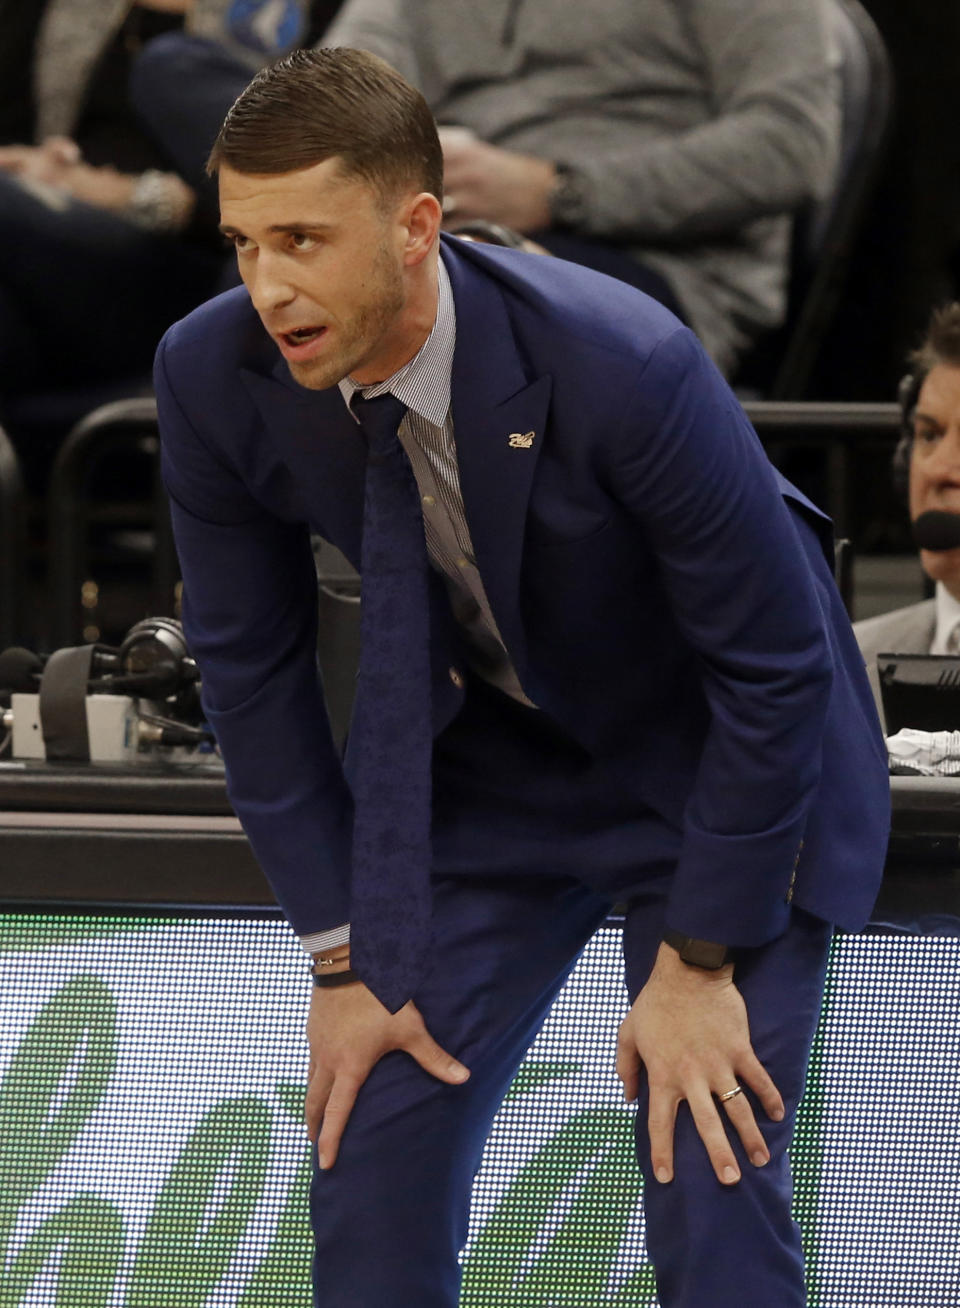 Minnesota Timberwolves interim head coach Ryan Saunders watches the first half of an NBA basketball game against the New Orleans Pelicans, Saturday, Jan. 12, 2019, in Minneapolis. (AP Photo/Jim Mone)